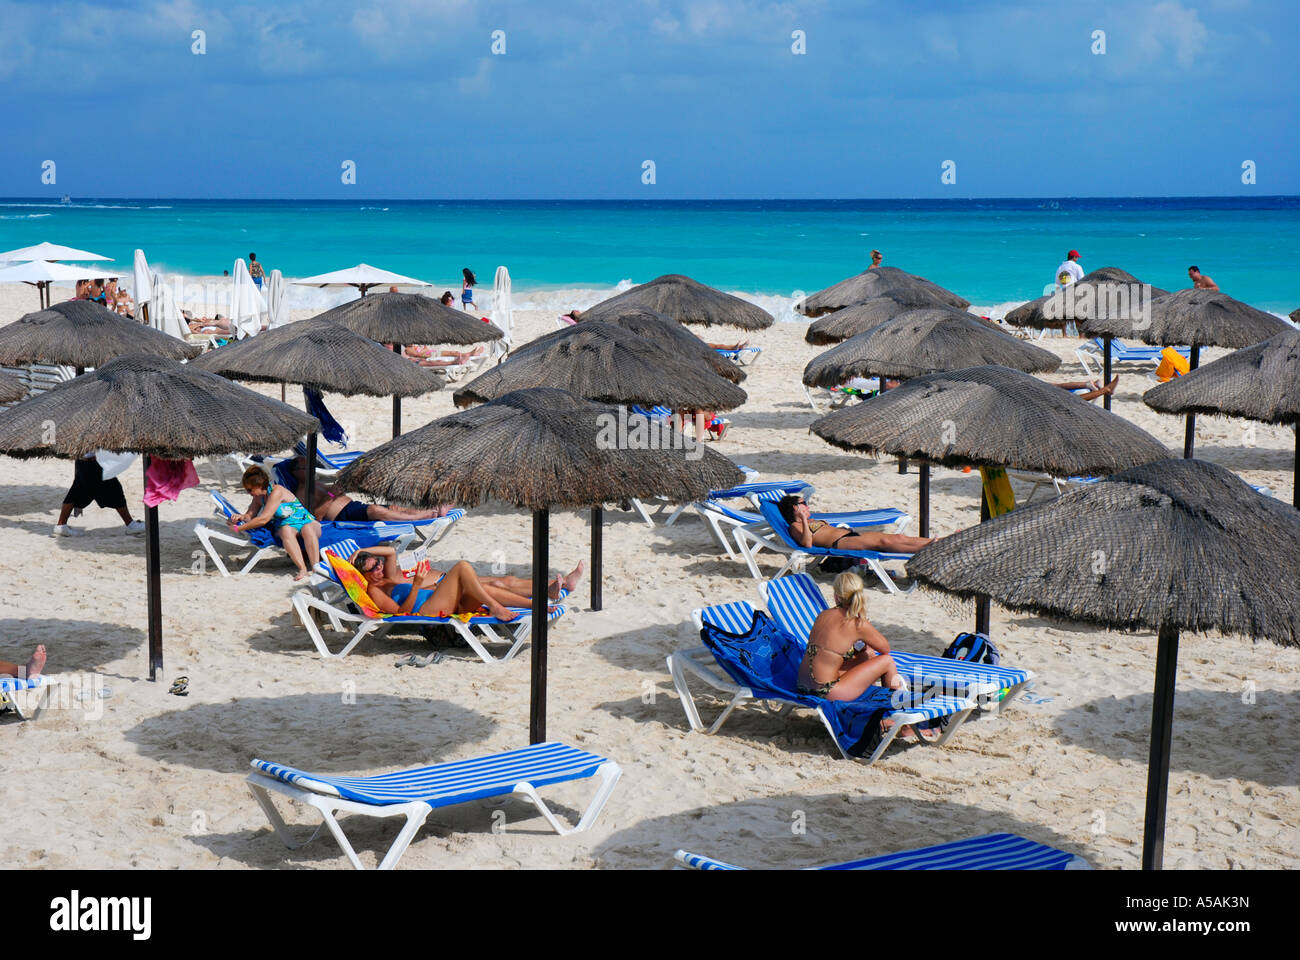 Mamita's beach club is one of many beach clubs along the beach in Playa del  Carmen where you can rent a sunchair or order food Stock Photo - Alamy